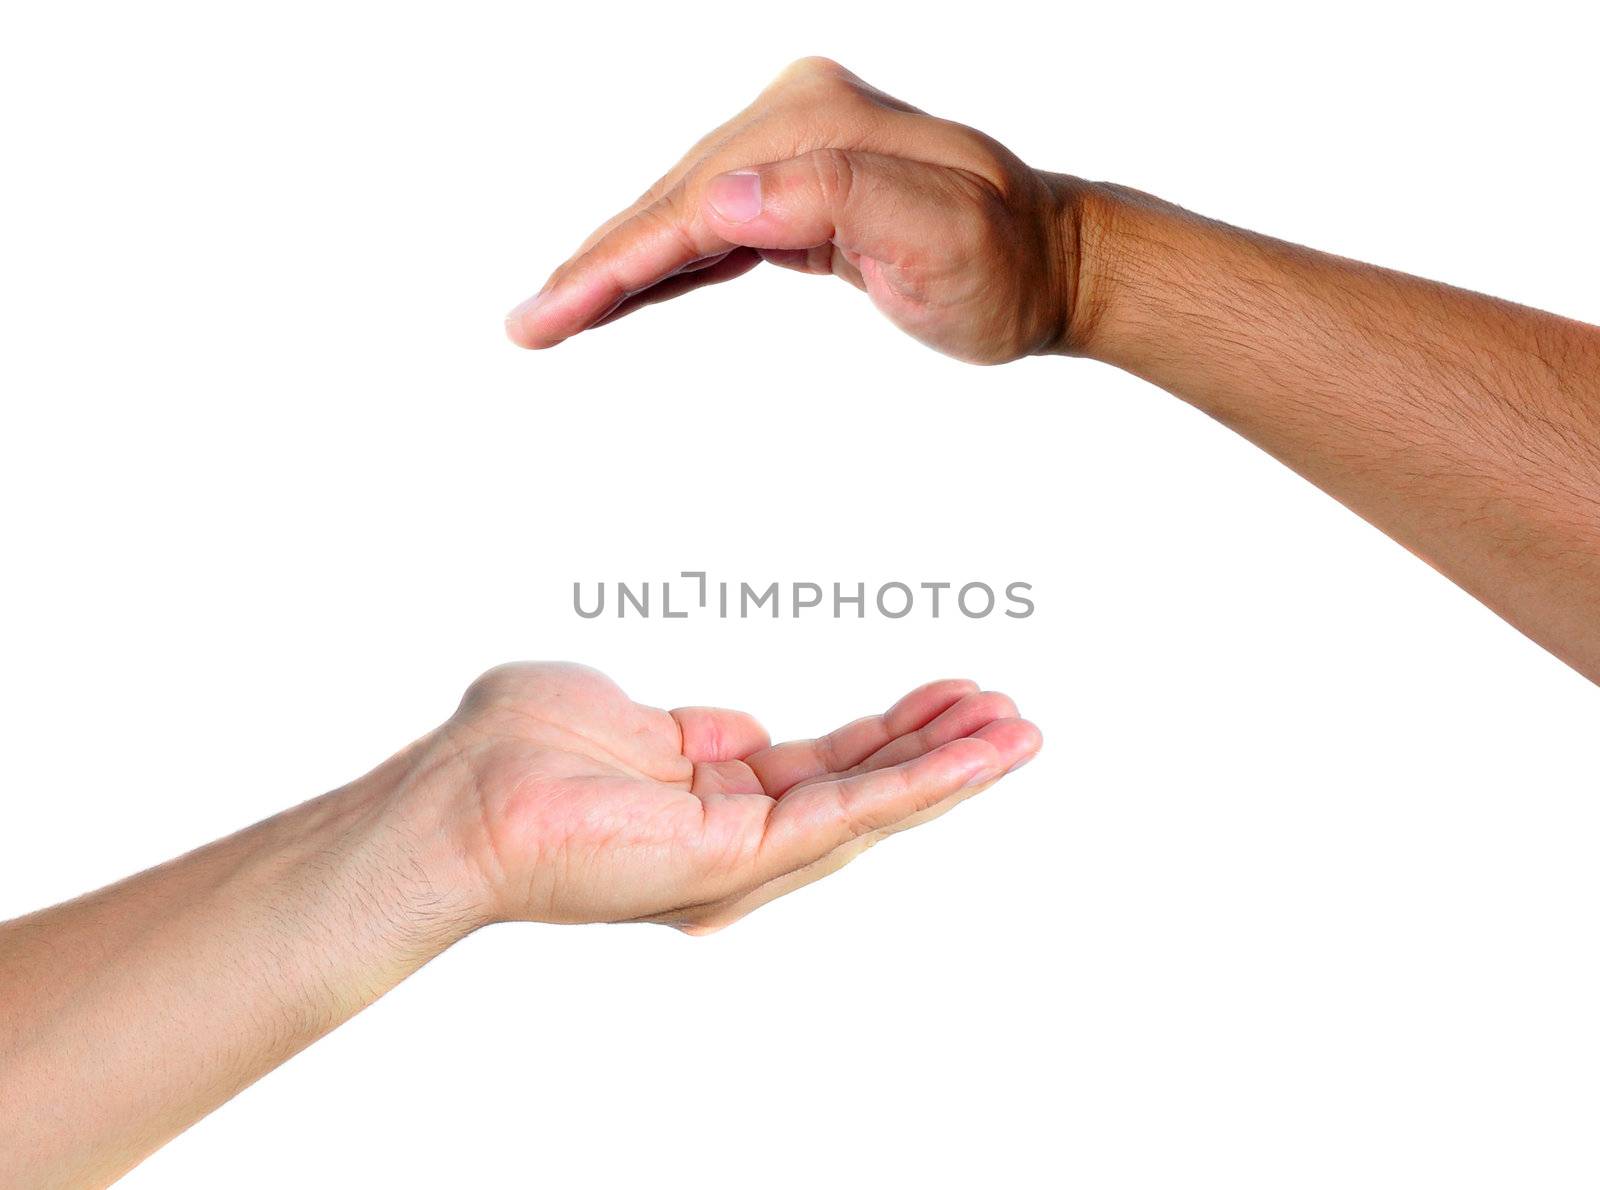 Two hands facing each other, representing protection